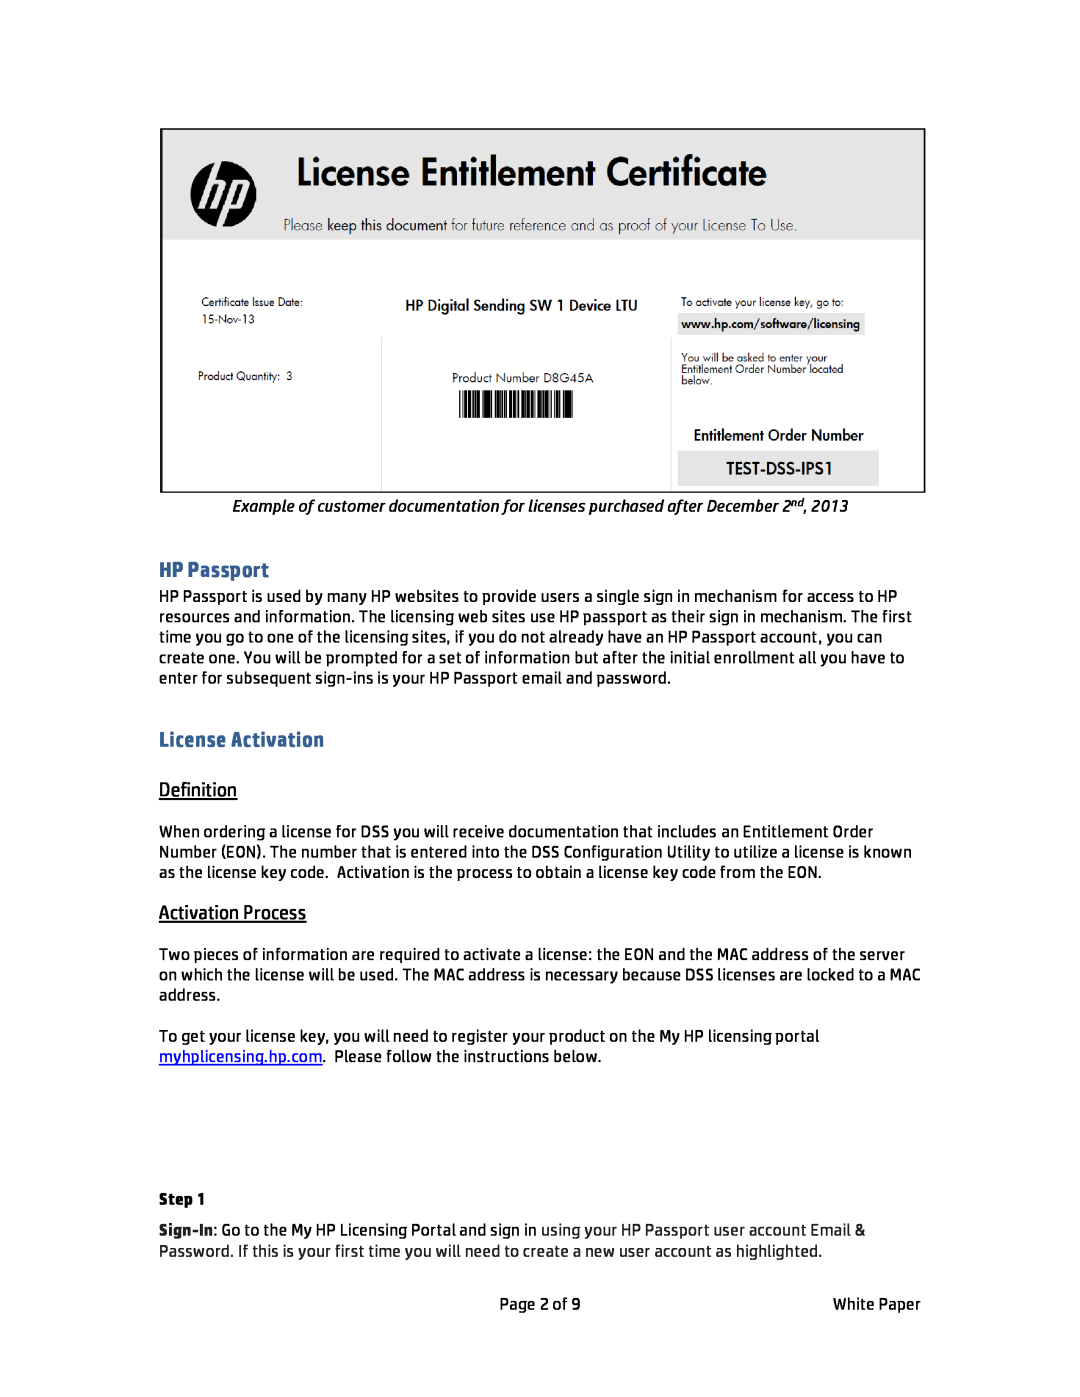 HP MFP Sending Software 4.25 manual HP Passport, License Activation, Step, Definition, Activation Process 